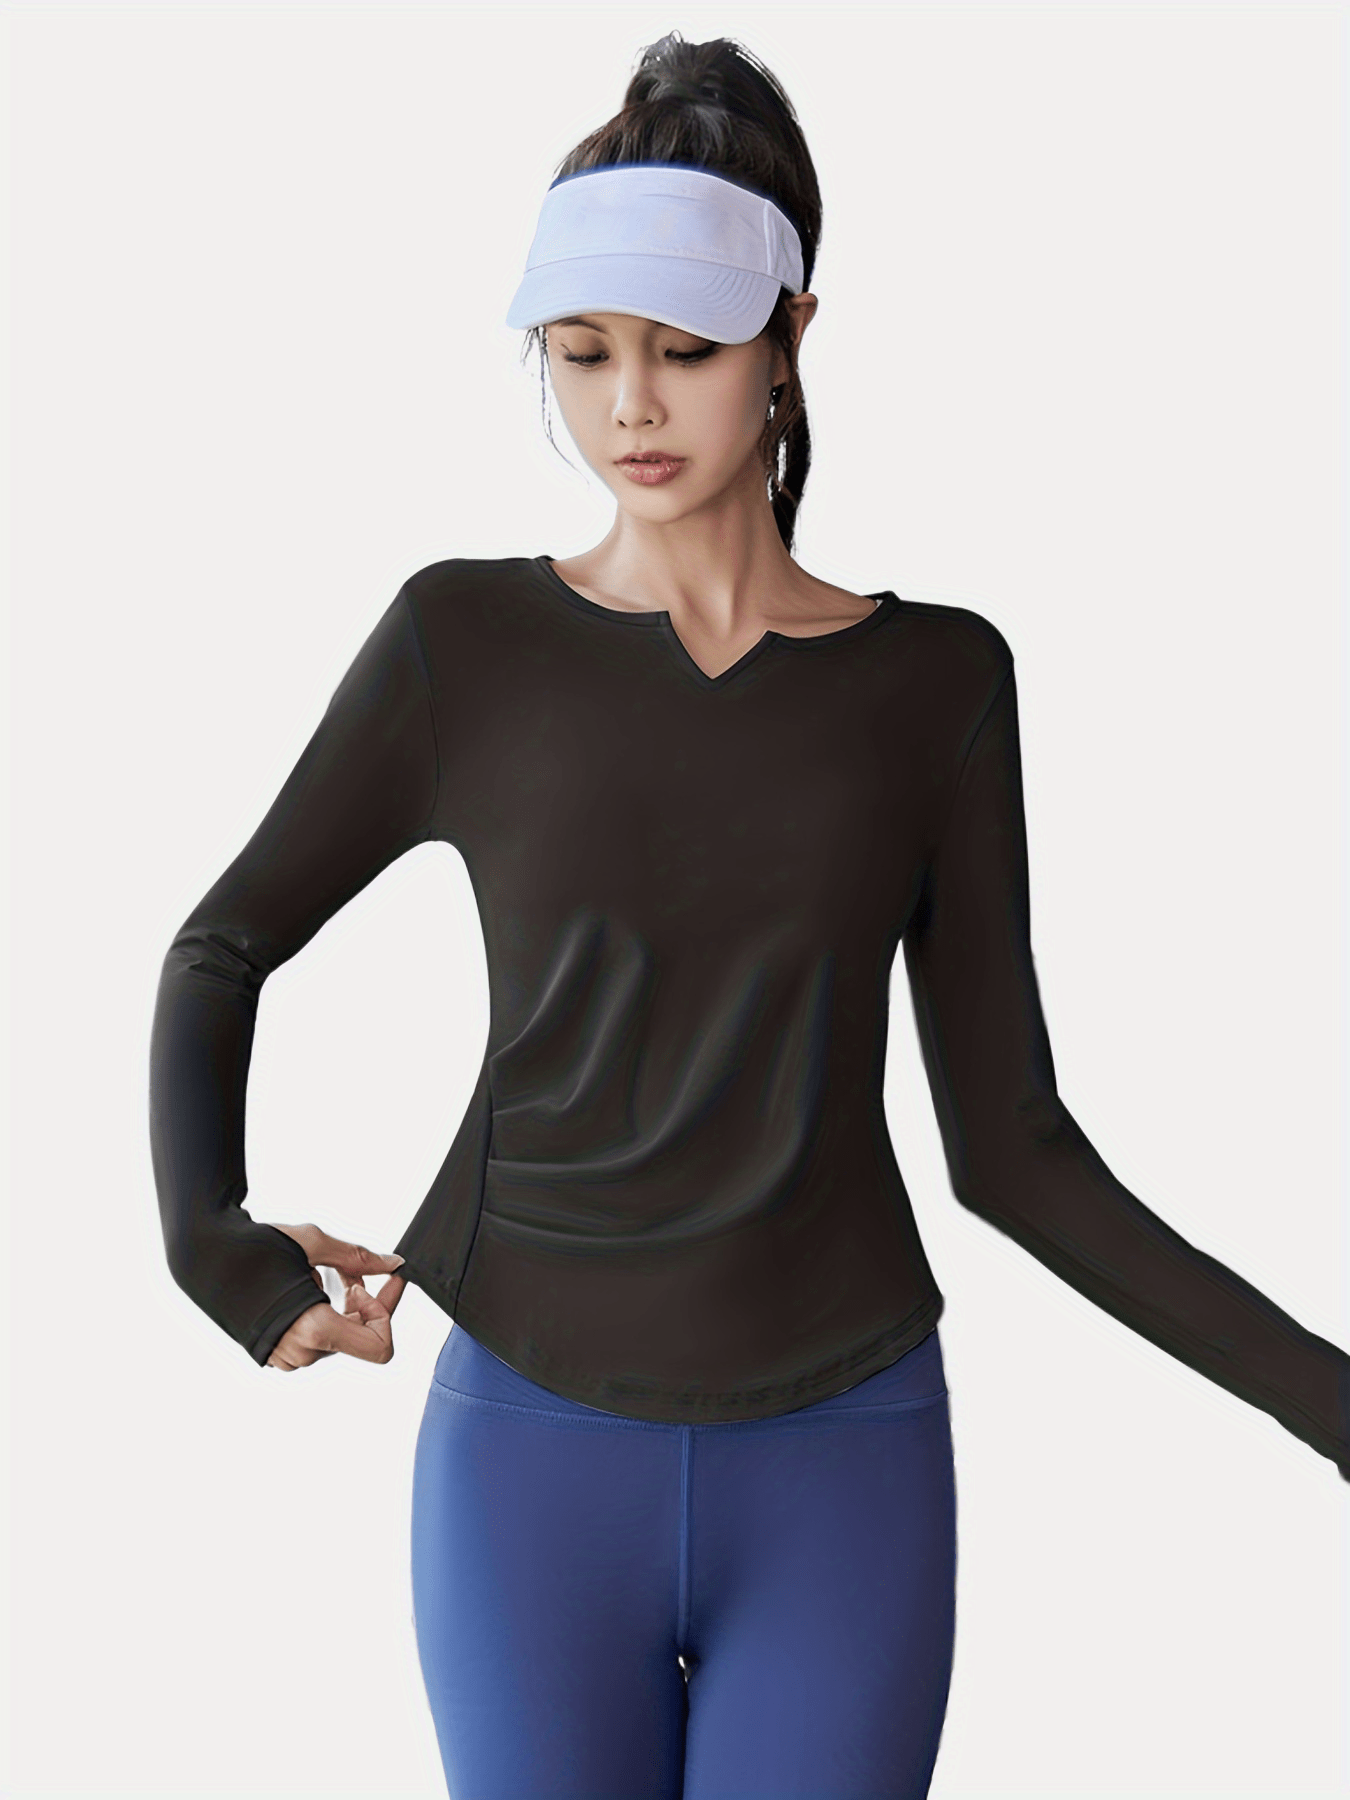 Long Sleeve Breathable Workout Tops for Women Activewear Quick-Drying  Stretchy Slim Fit Thumbhole T Shirt Athletic Running Sports Shirts Dry Fit  Mesh Yoga Gym Top 